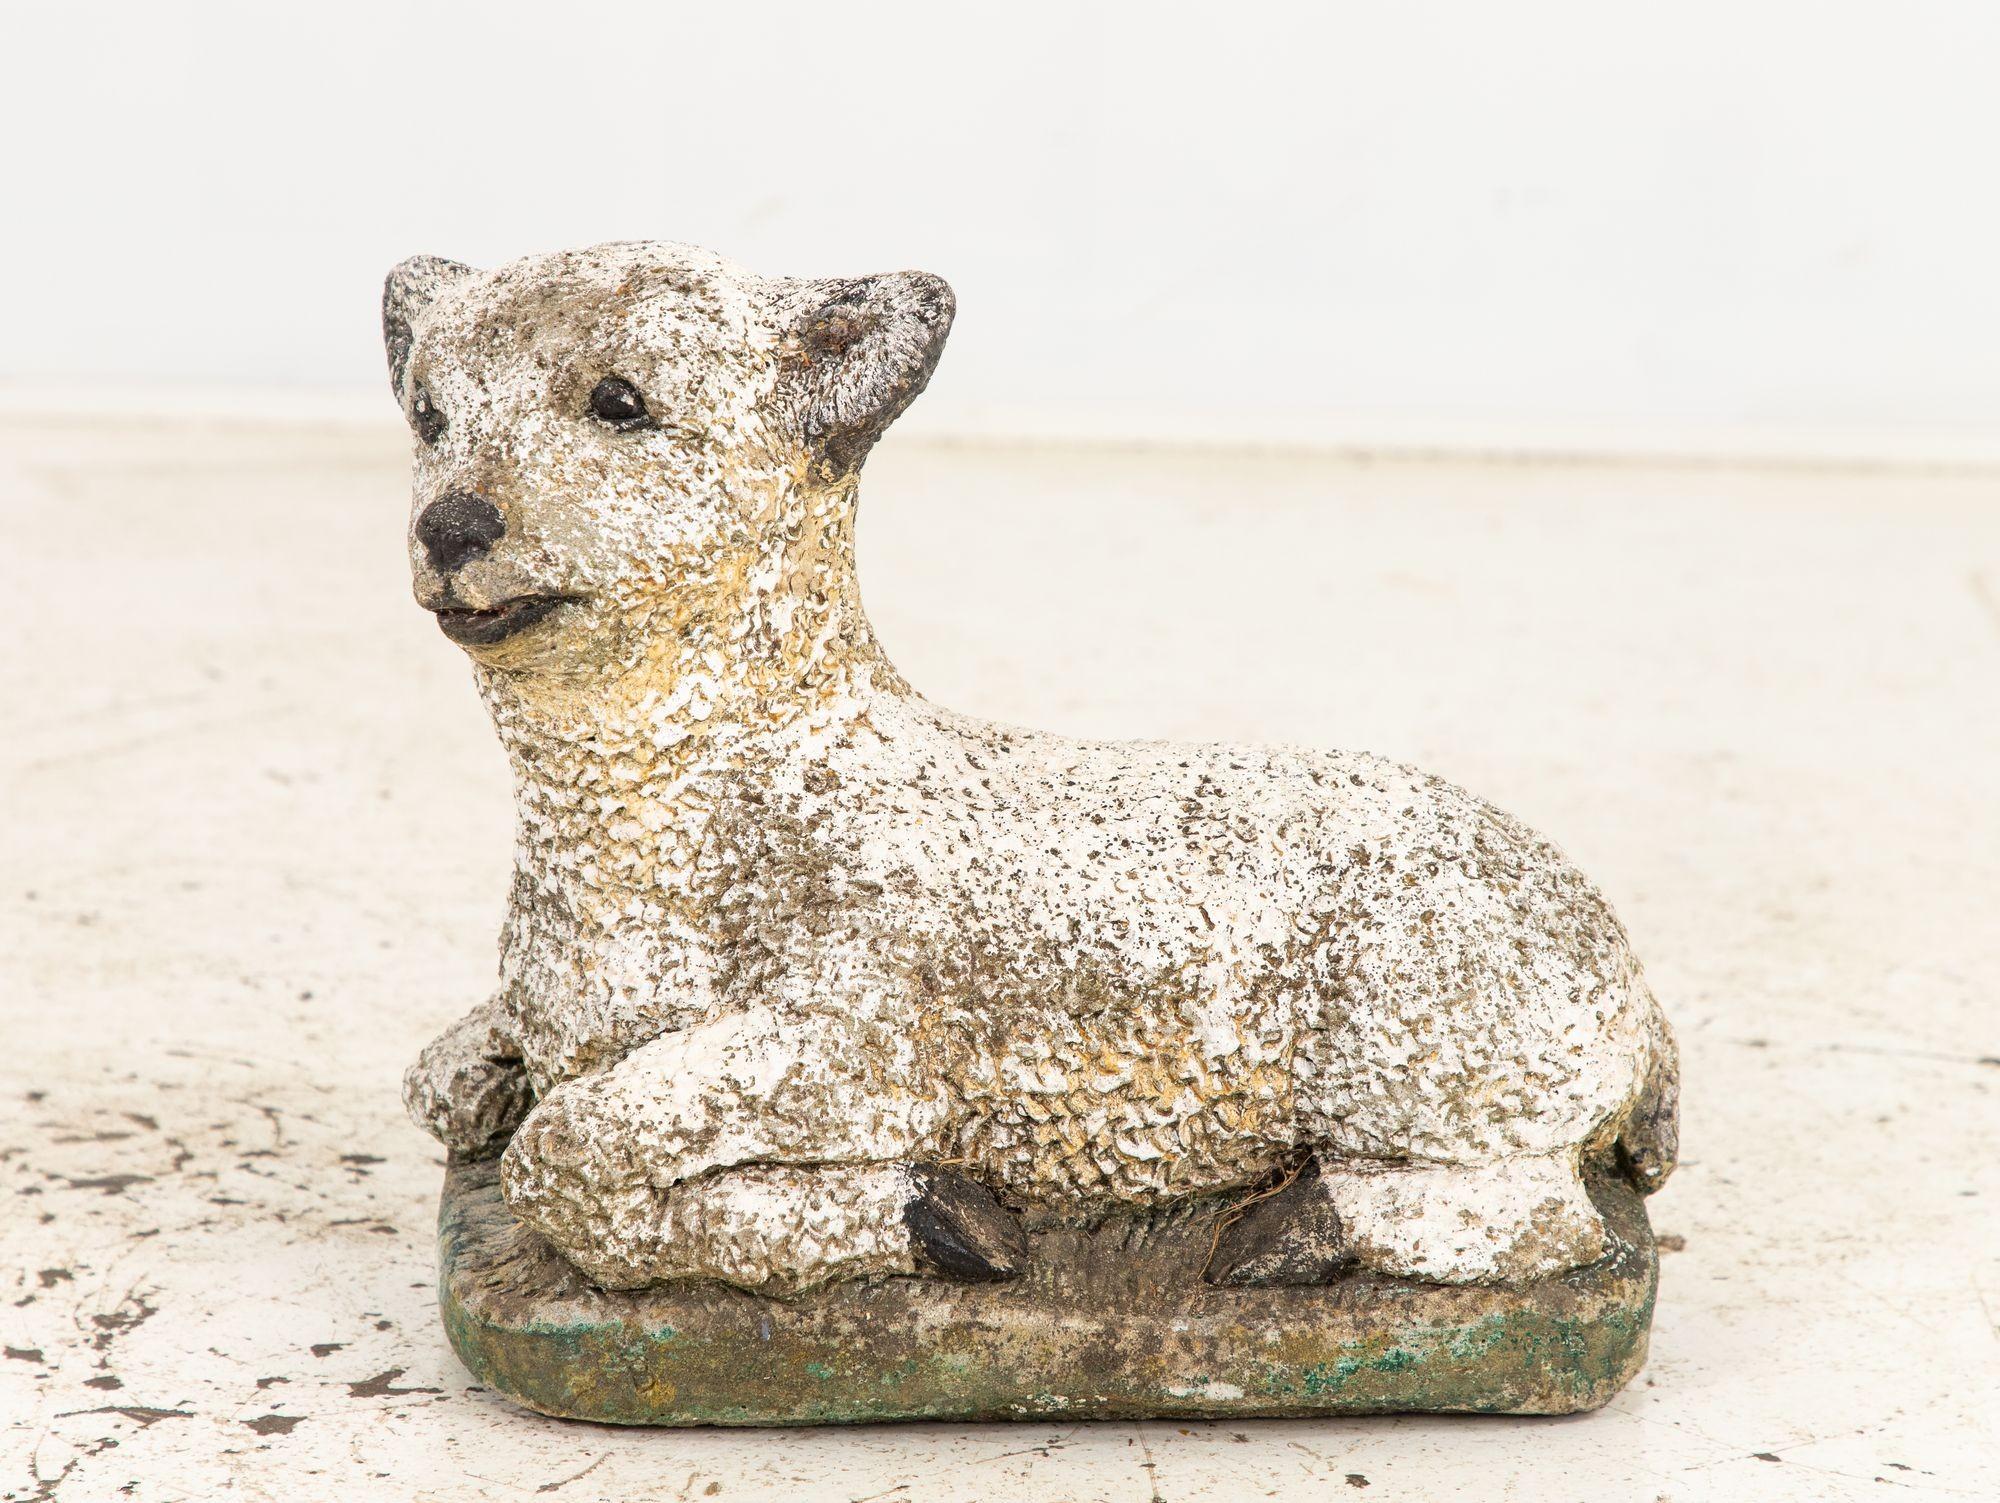 This charming French mid-20th-century concrete garden ornament features a lifelike representation of a lamb nestled in the grass, exuding an air of serenity and pastoral charm. The meticulous attention to detail shines through in the curly wool